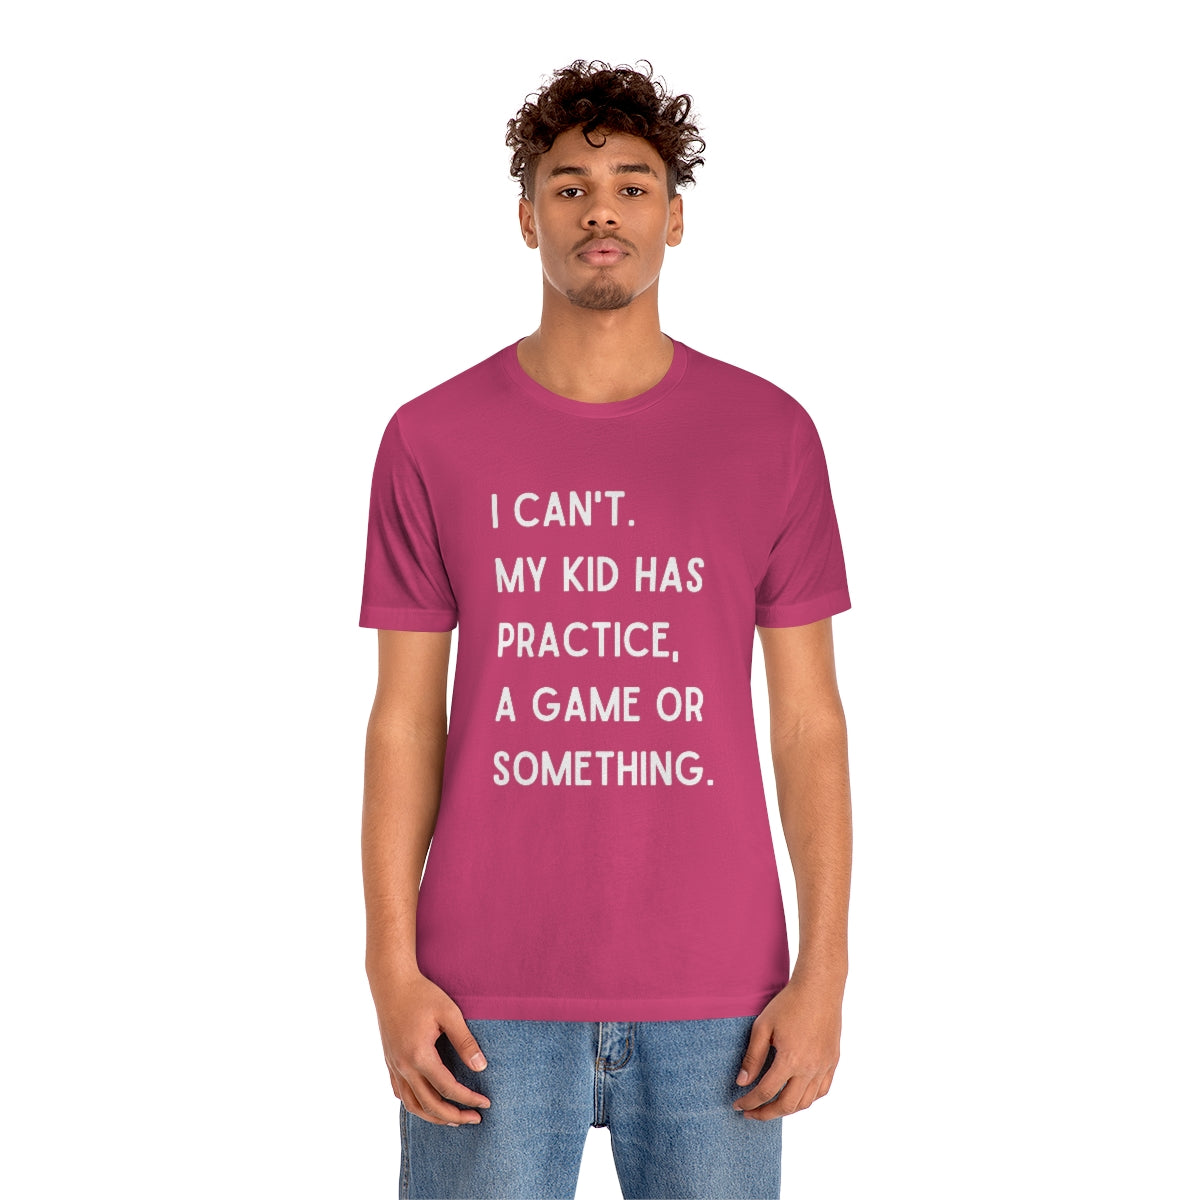 I Can't My Kid Has Practice A Game Or Something Graphic T-Shirt ~ Funny Sports Mom Shirt